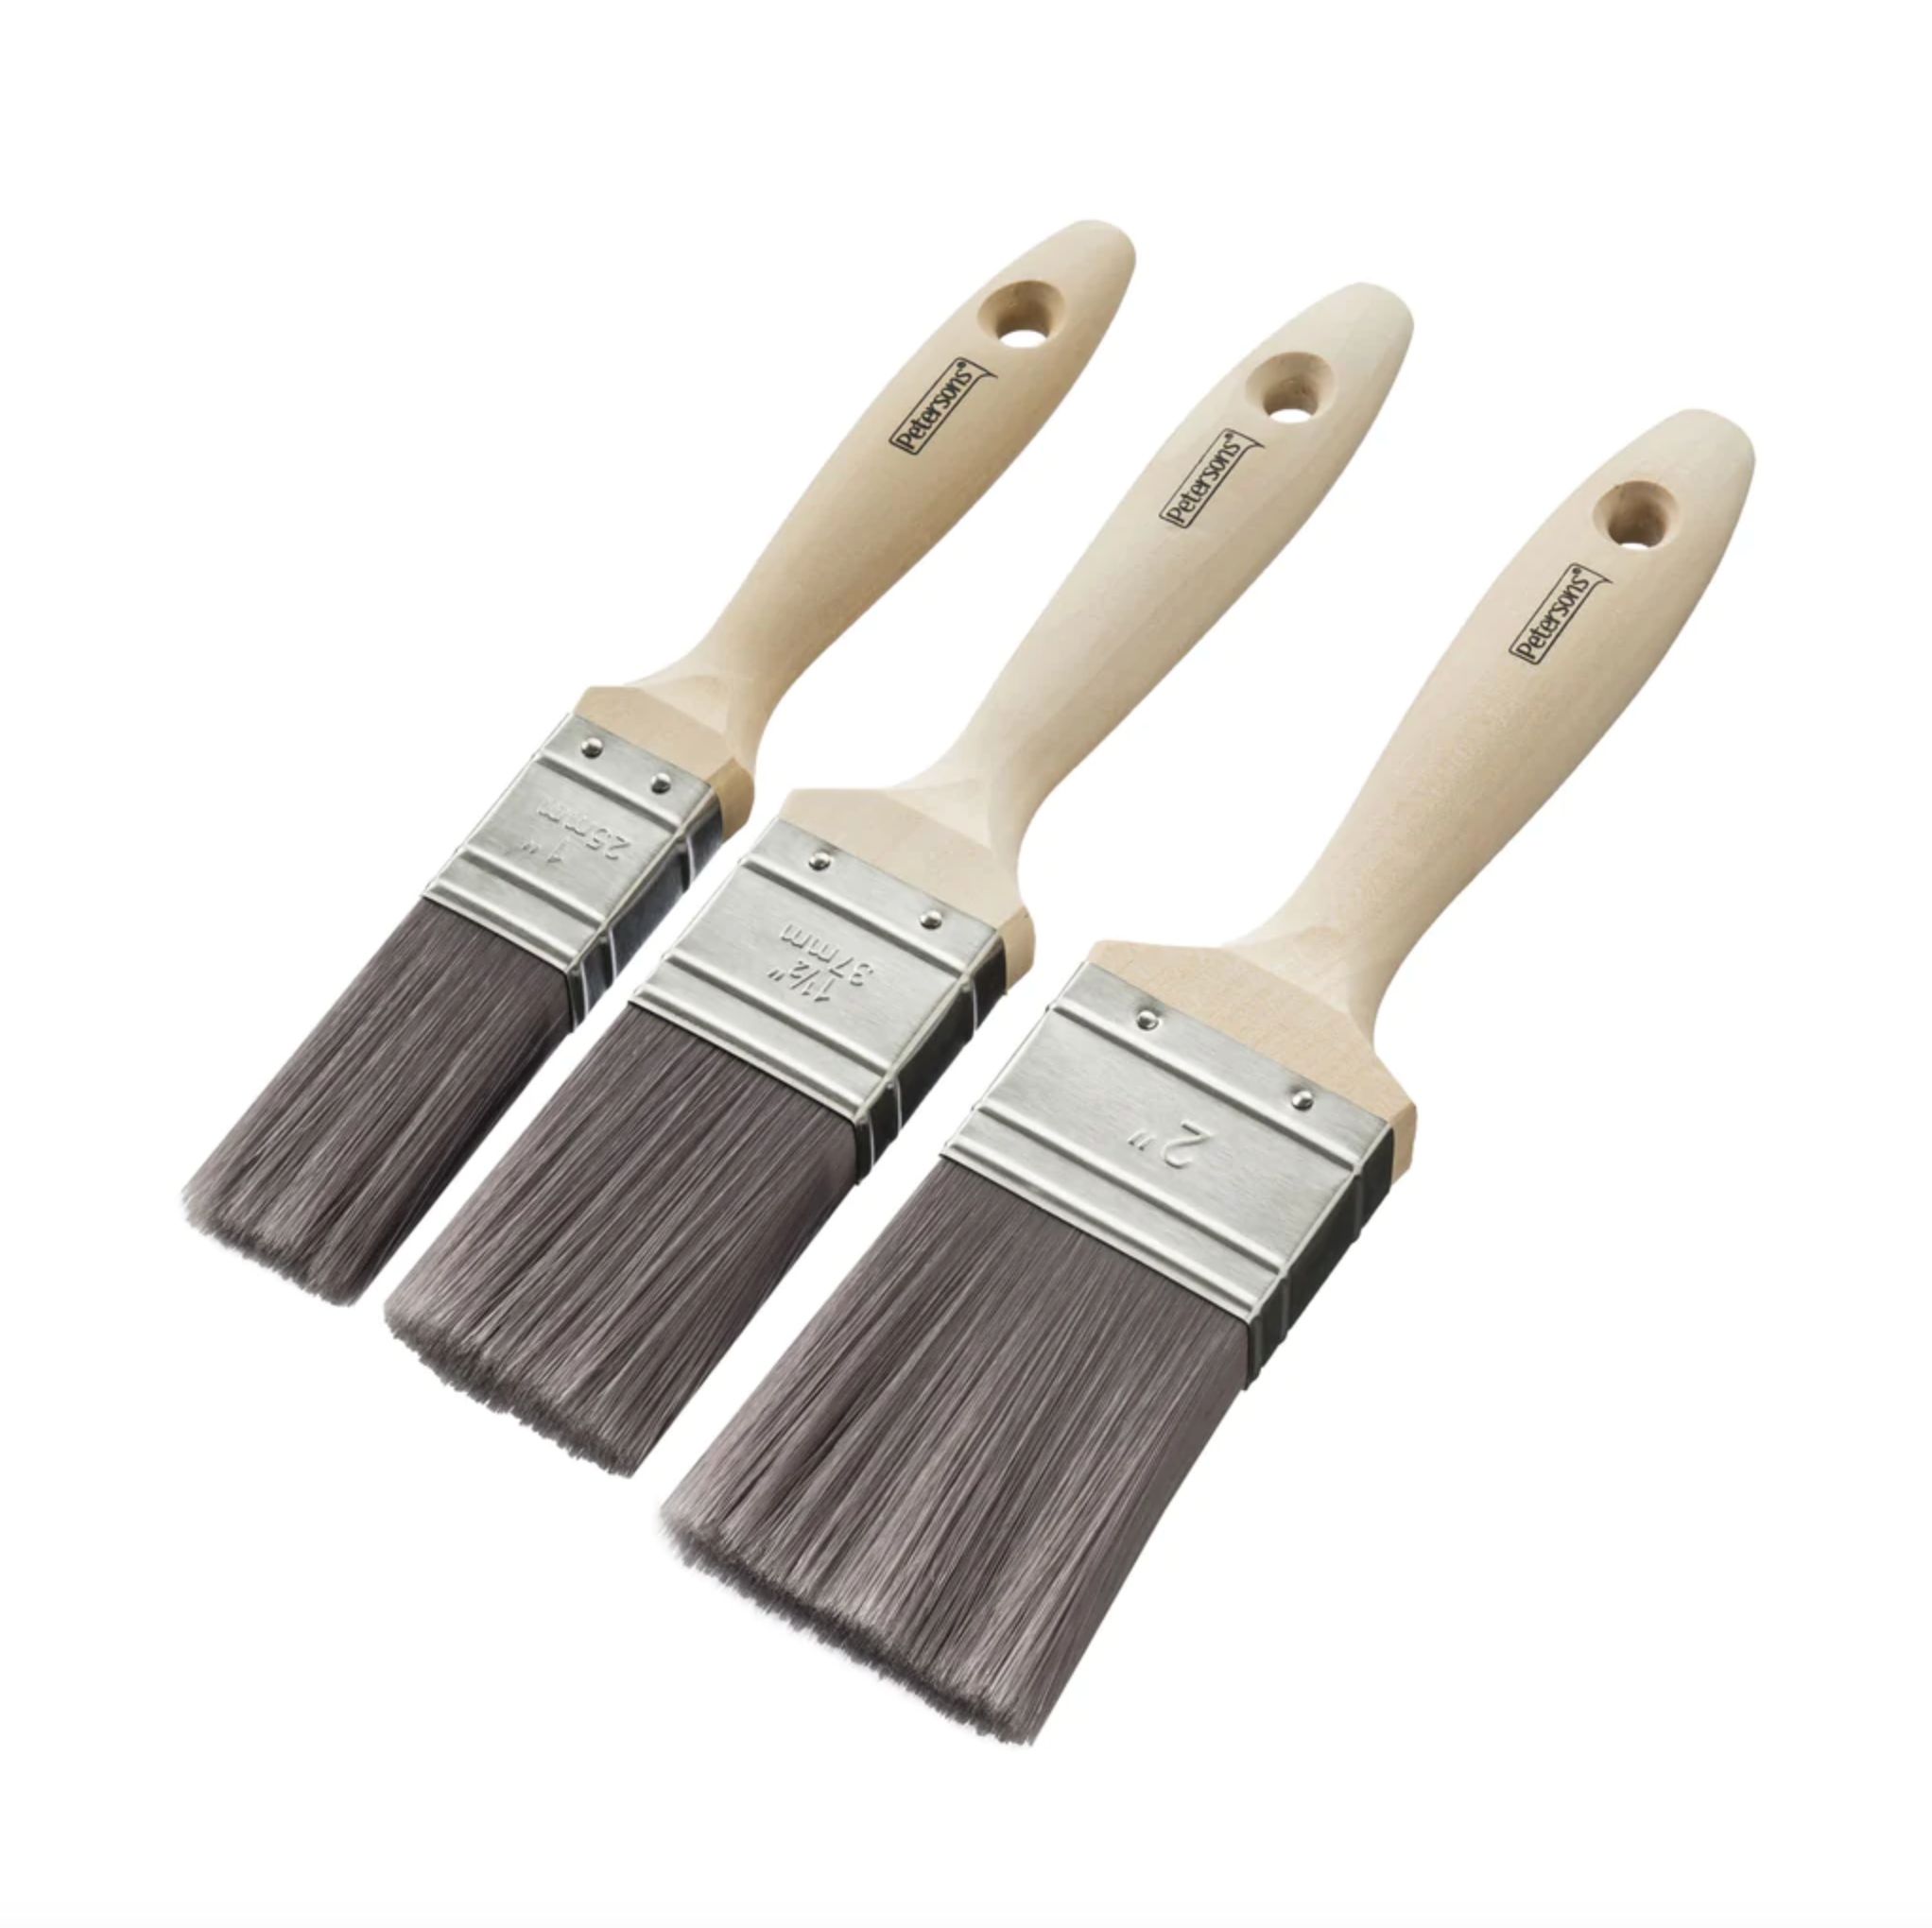 Petersons Predator Synthetic Paint Brush Set (3 Pack)